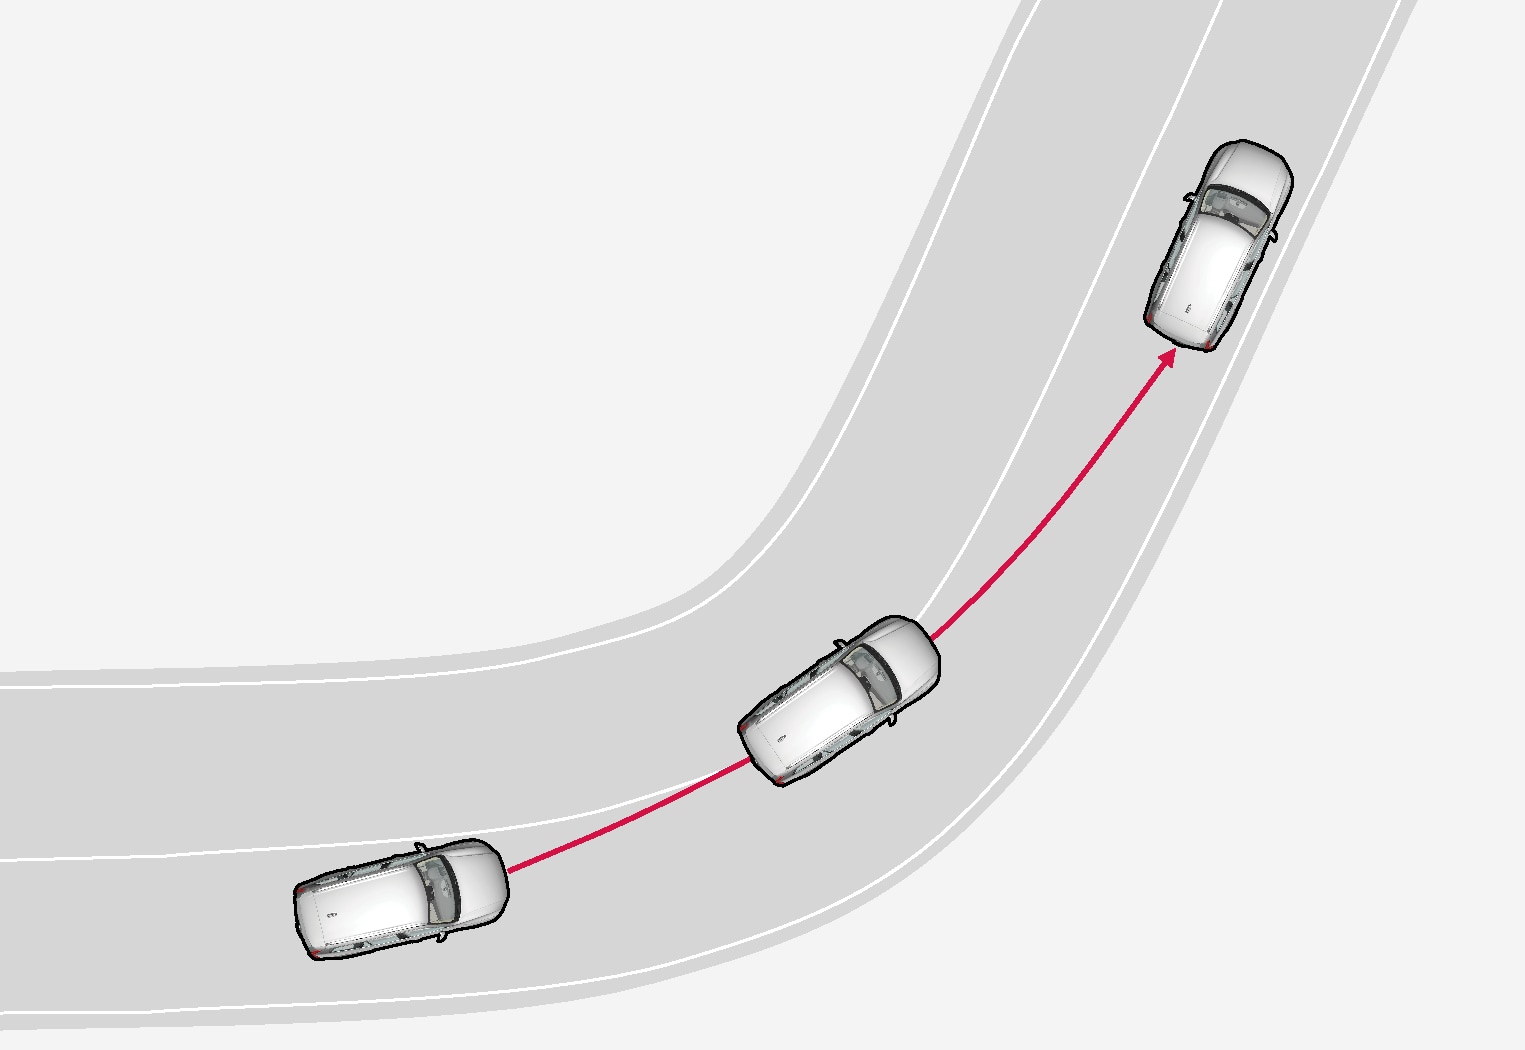 P5-1507-Lane keeping aid does not engage on sharp inside curves